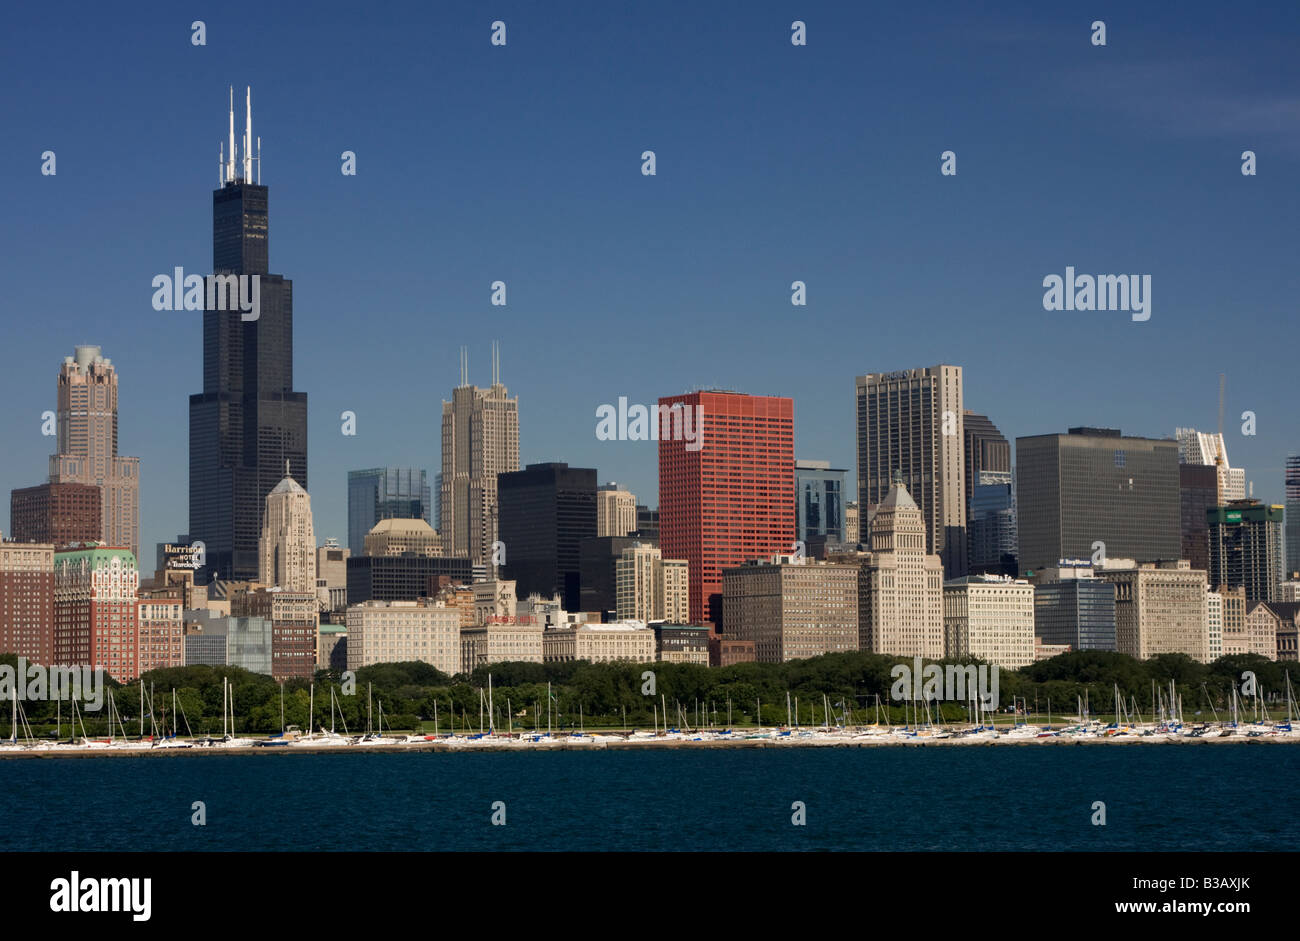 Chicago Illinois Skyline, Early Morning.  Sears Tower (Willis Tower) on Left, Lake Michigan in Foreground. Stock Photo